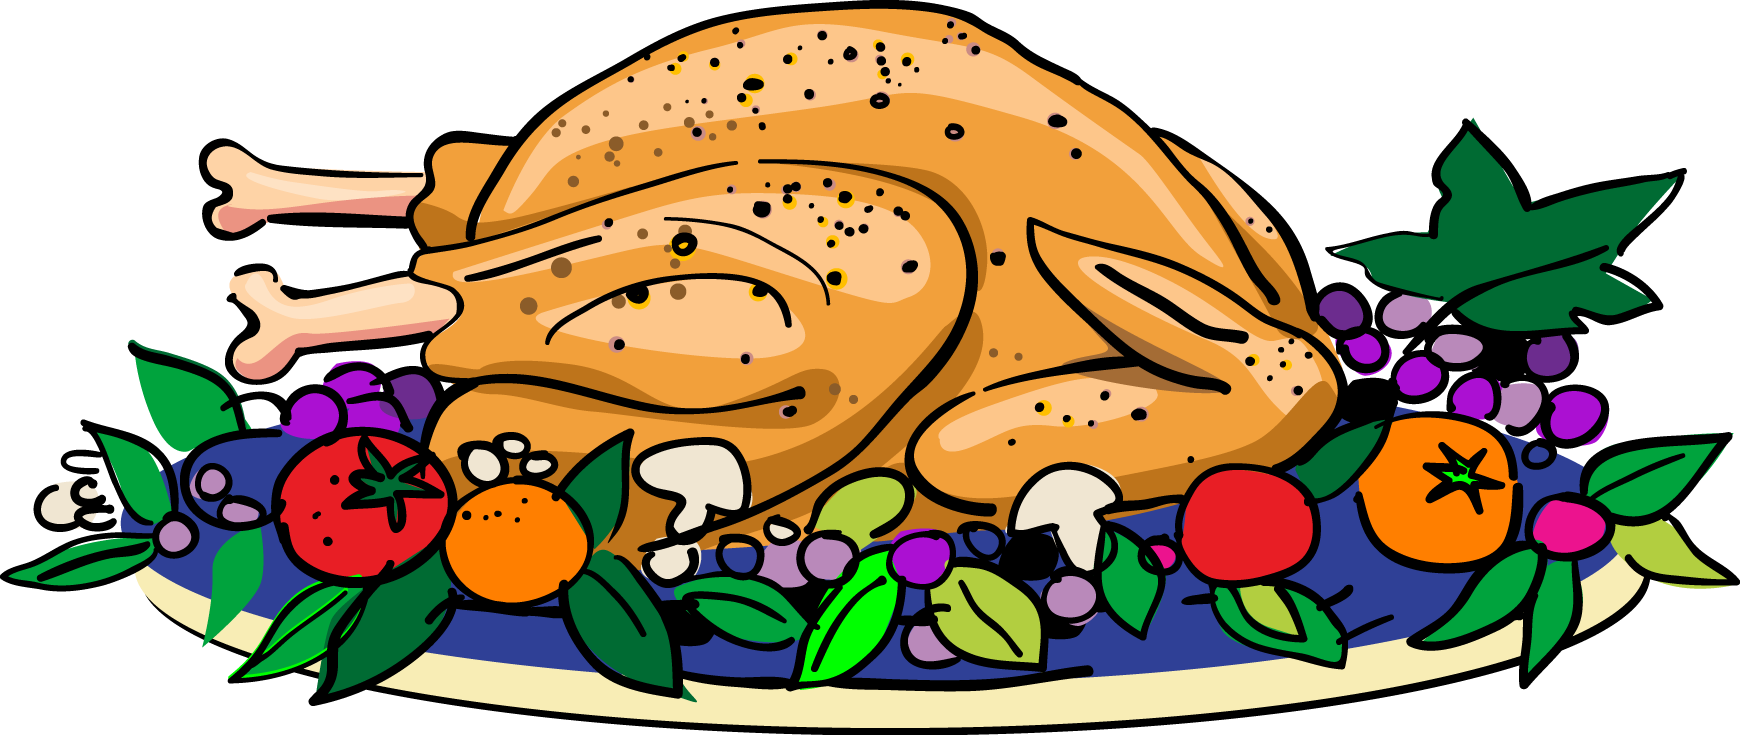 Turkey dinner clipart free images 4 clipartix